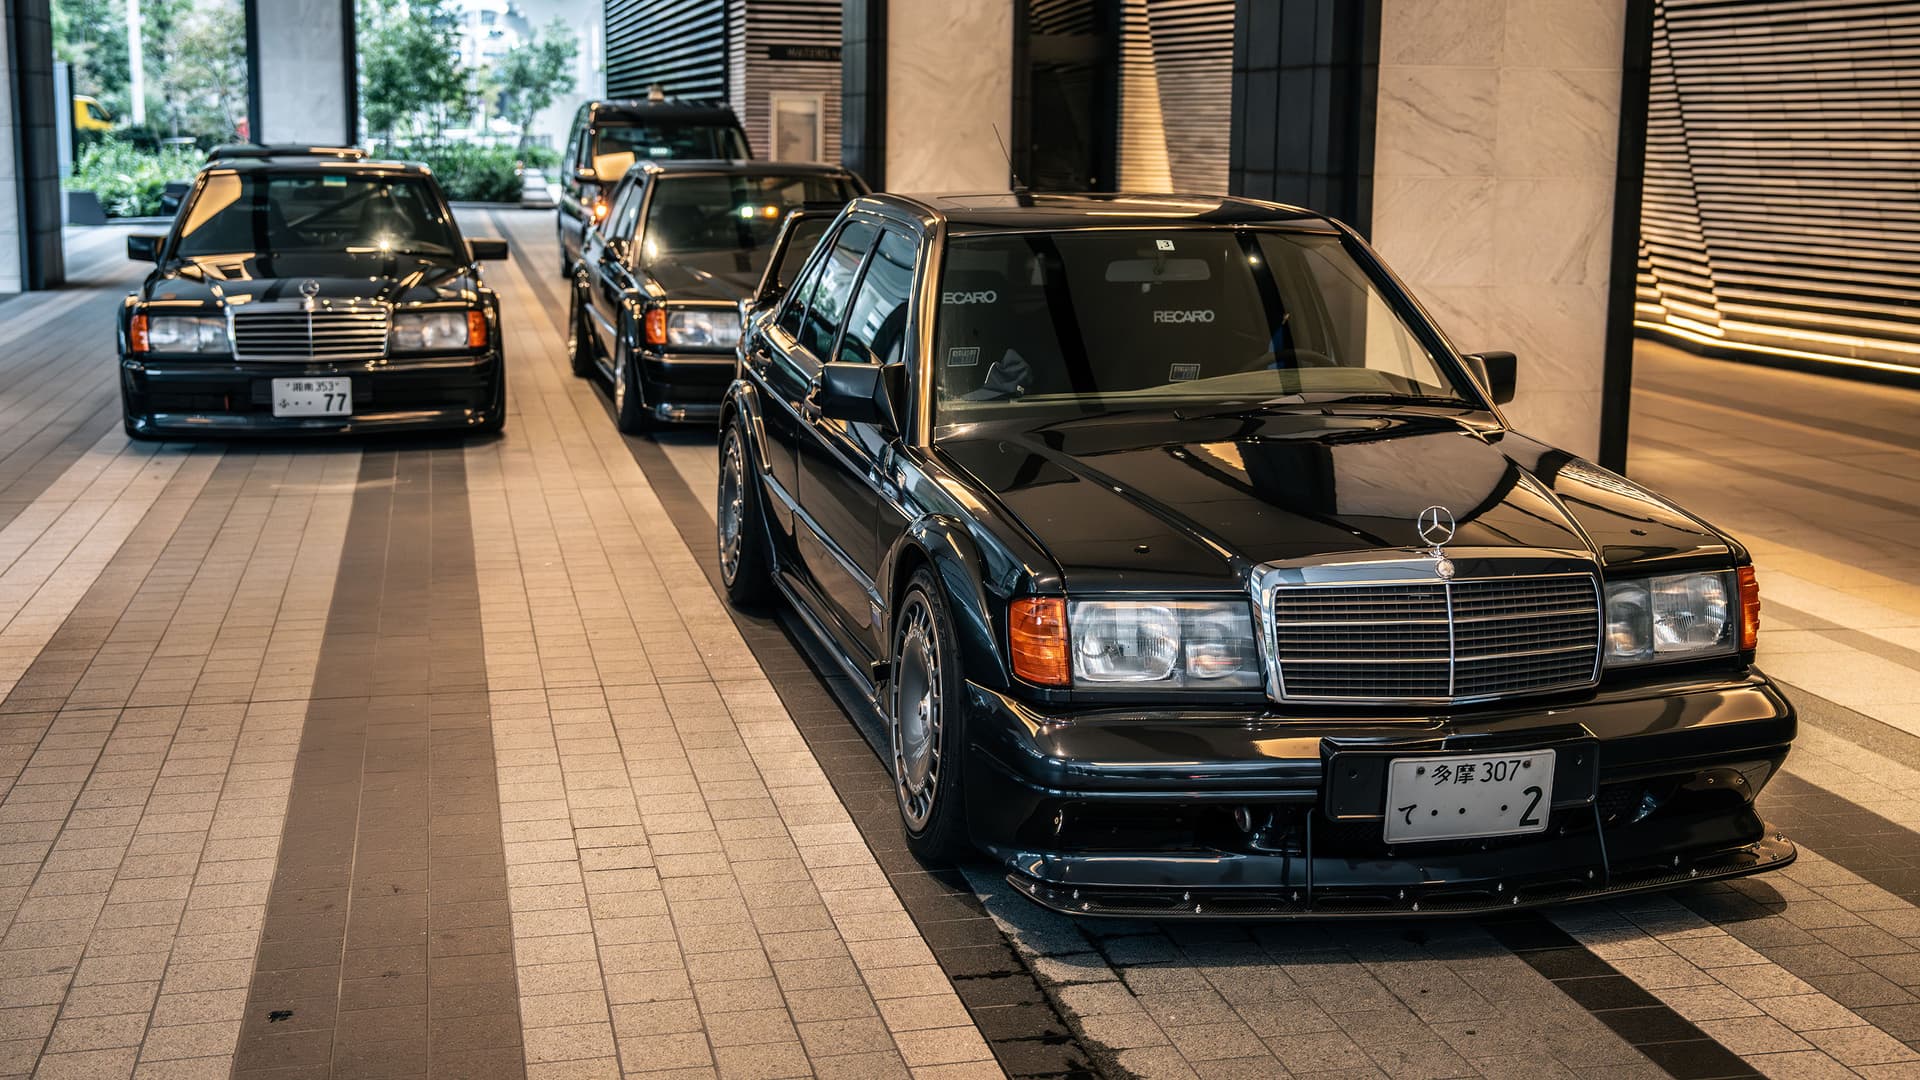 w201, 190e, 2.5-16, 2.3-16, mercedes, amg, mercedes-benz, cosworth, singapore, tokyo, daimler, amg, mercedes-benz, mercedes, motorsports, mercedes-amg, one night in tokyo with mick schumacher and a mercedes w201 190e evo ii